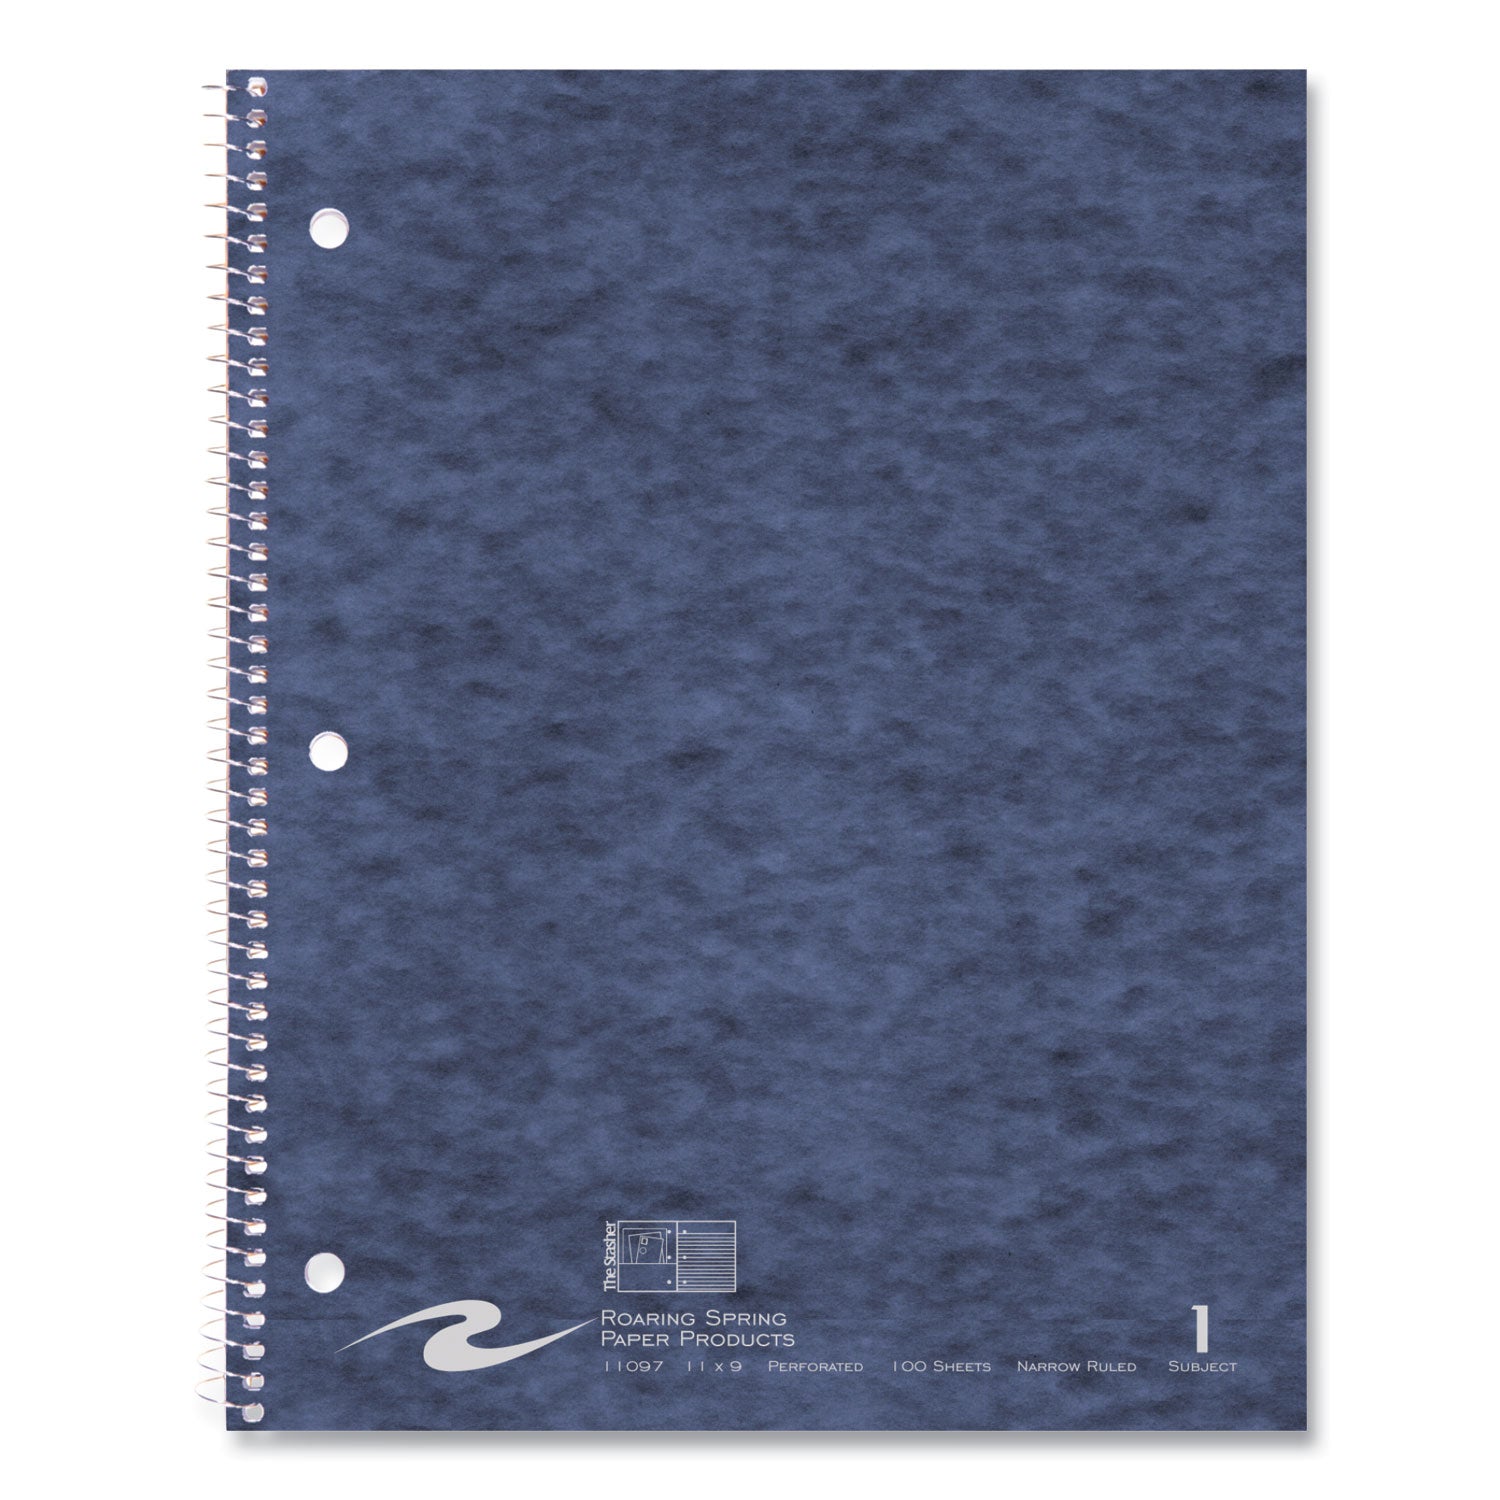 stasher-wirebound-notebooks-1-subject-narrow-rule-randomly-asst-cover-100-11x9-sheets-24-ct-ships-in-4-6-bus-days_roa11097cs - 2